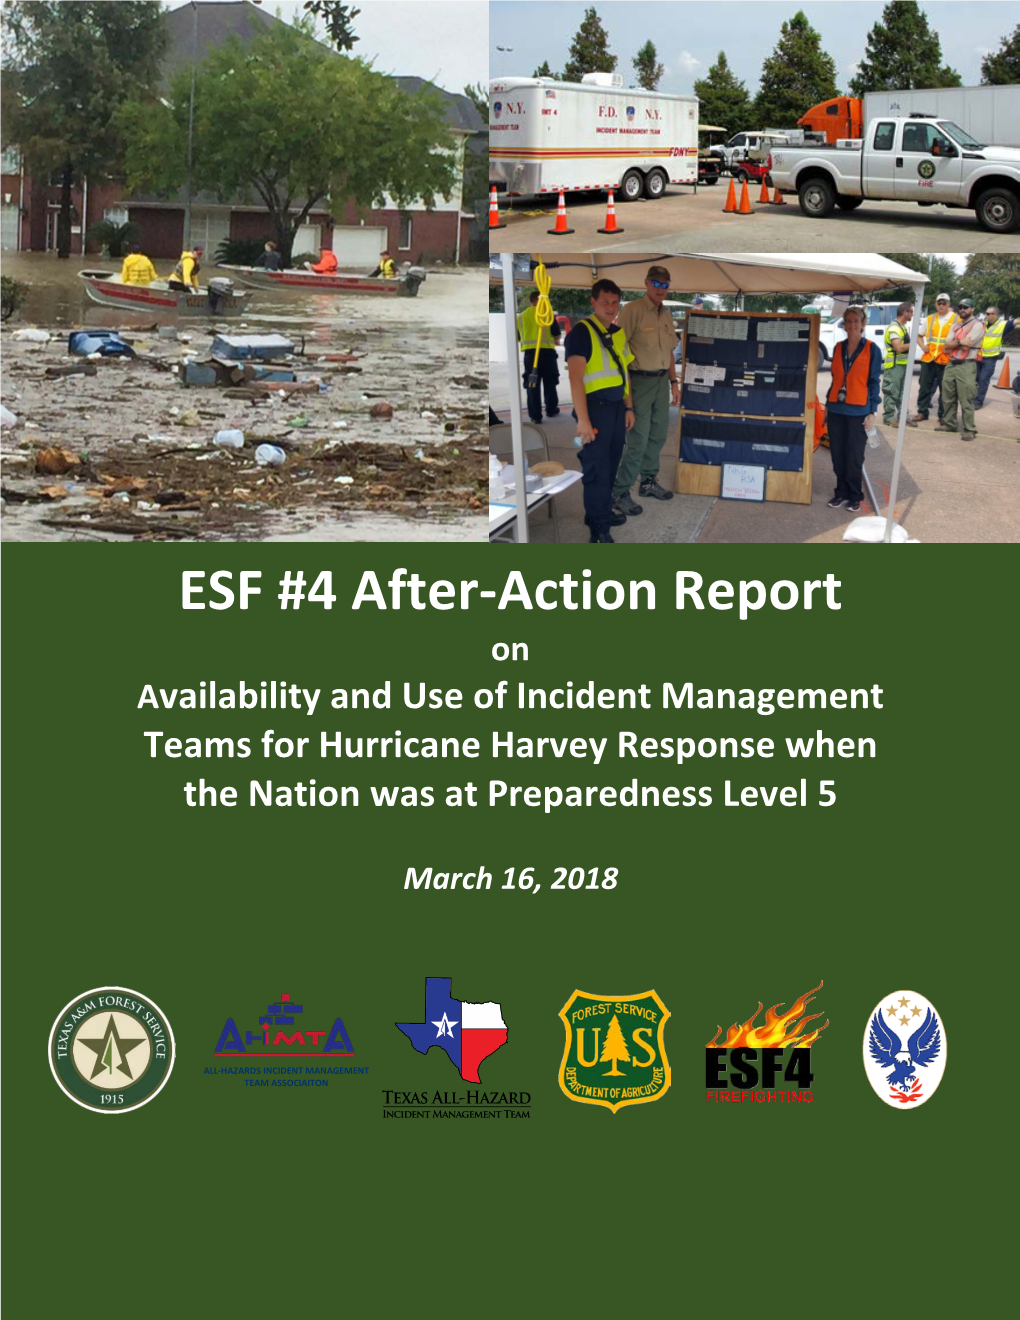 ESF #4 After-Action Report on Availability and Use of Incident Management Teams for Hurricane Harvey Response When the Nation Was at Preparedness Level 5